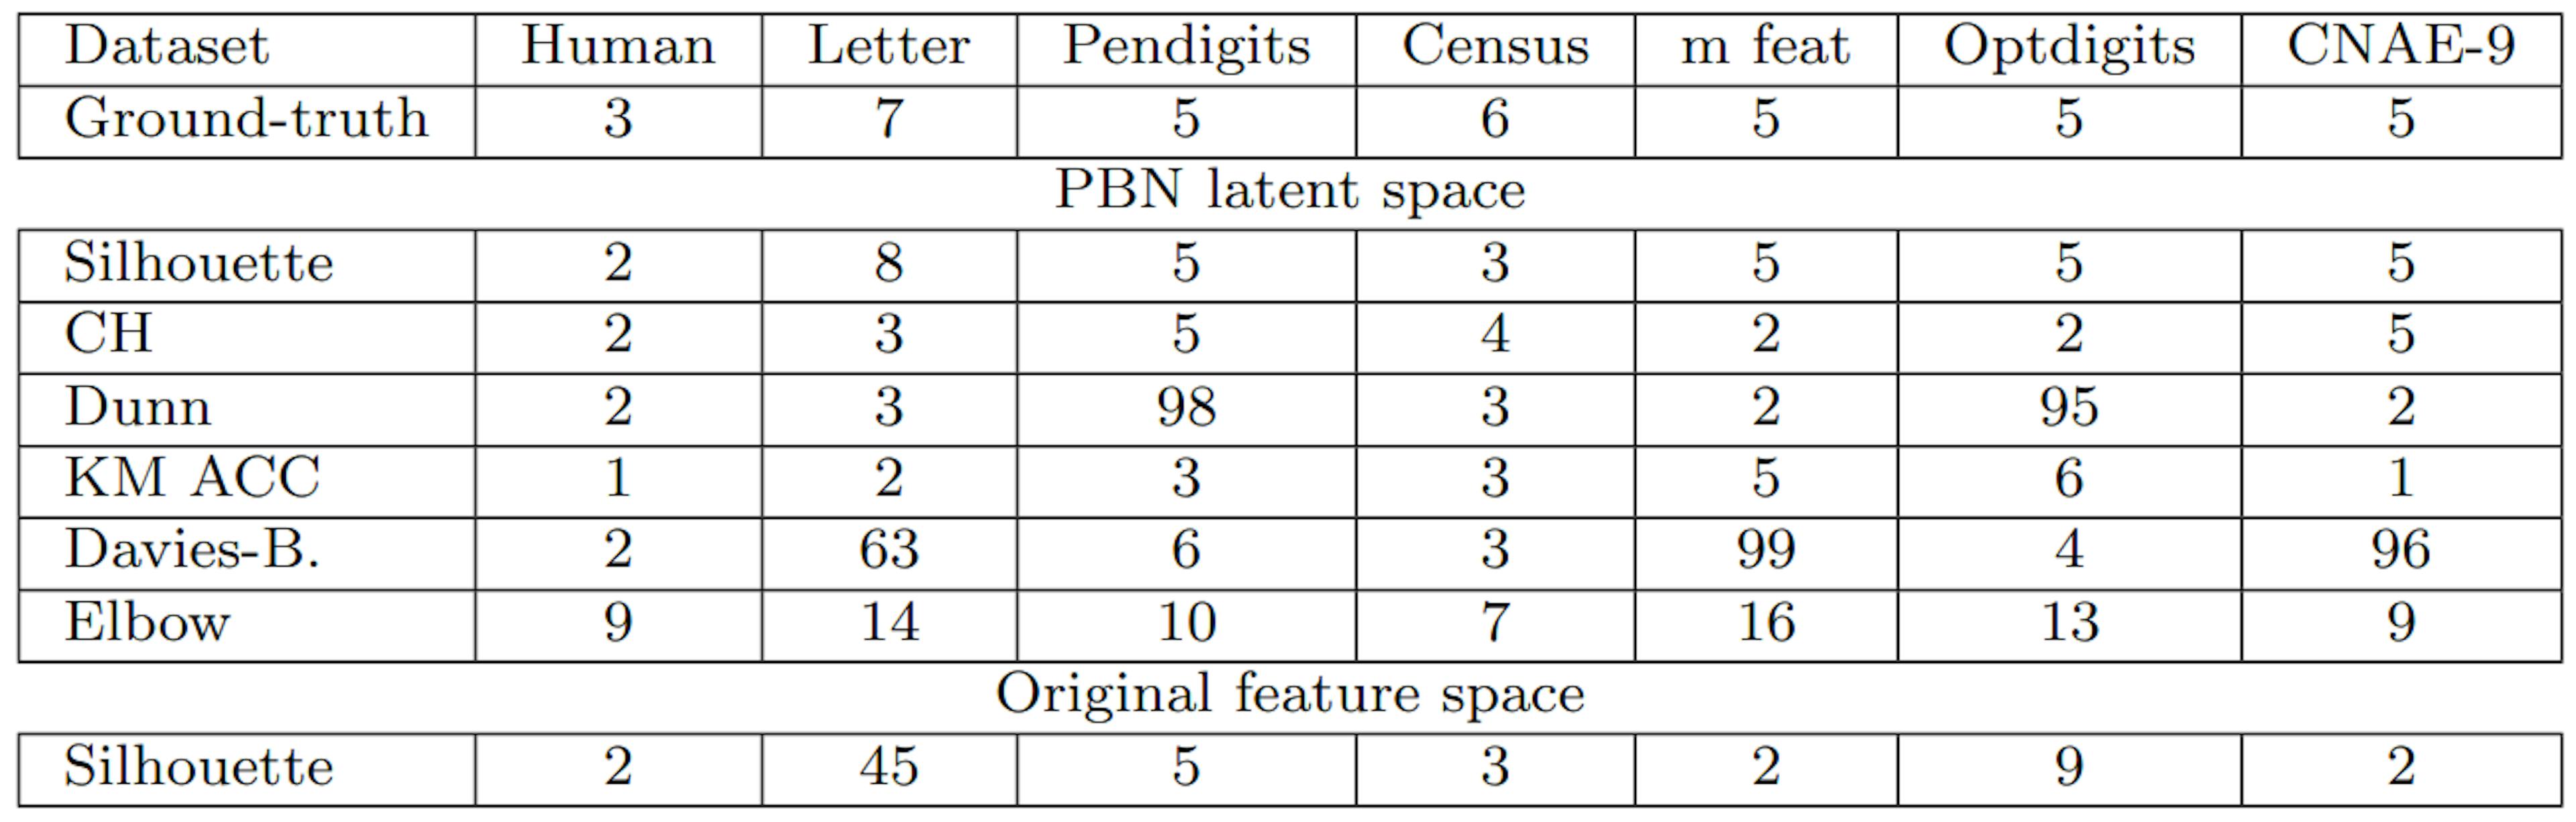 Table C4: An estimation of the number of novel classes with some CVIs in the latent space of PBN.